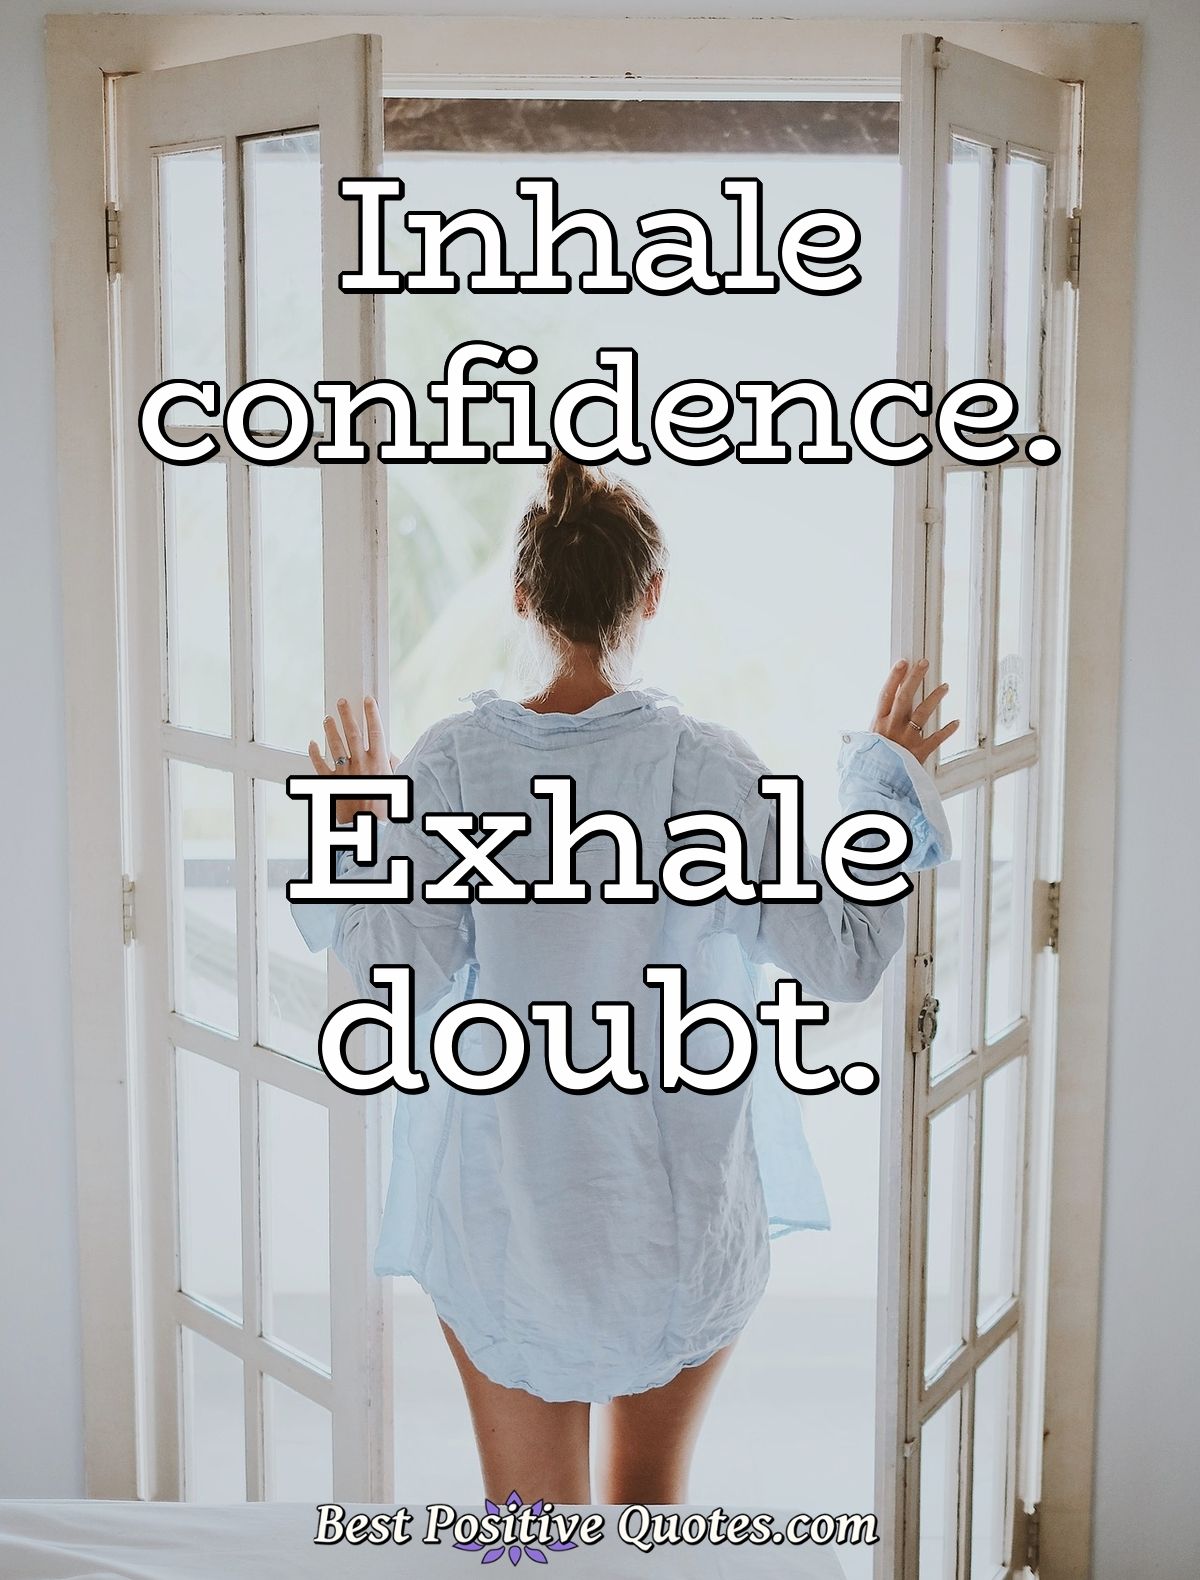 Inhale confidence. Exhale doubt. - Anonymous